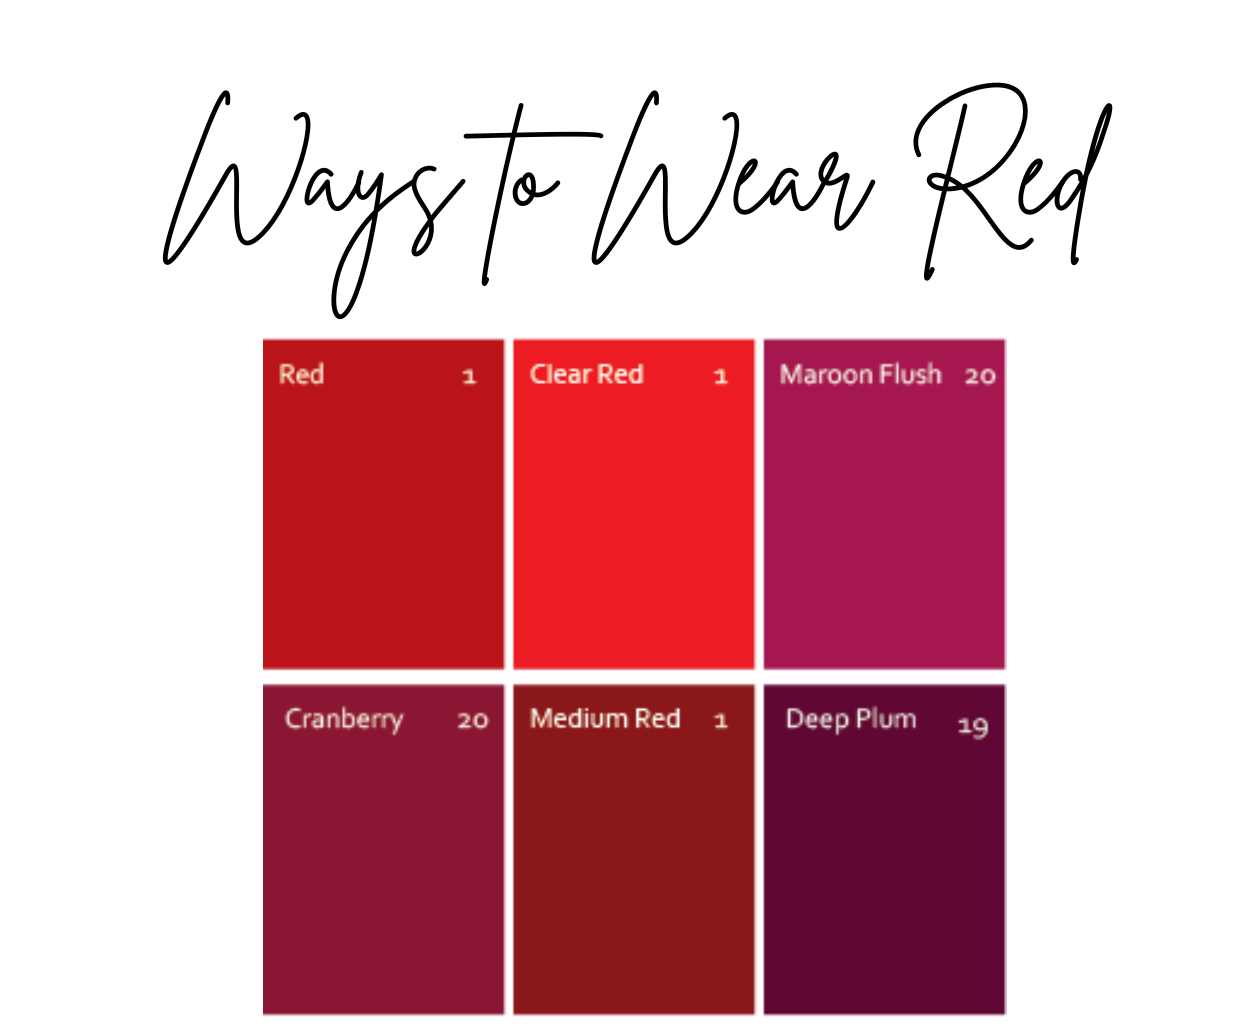 4 Ways To Wear Red This Fall